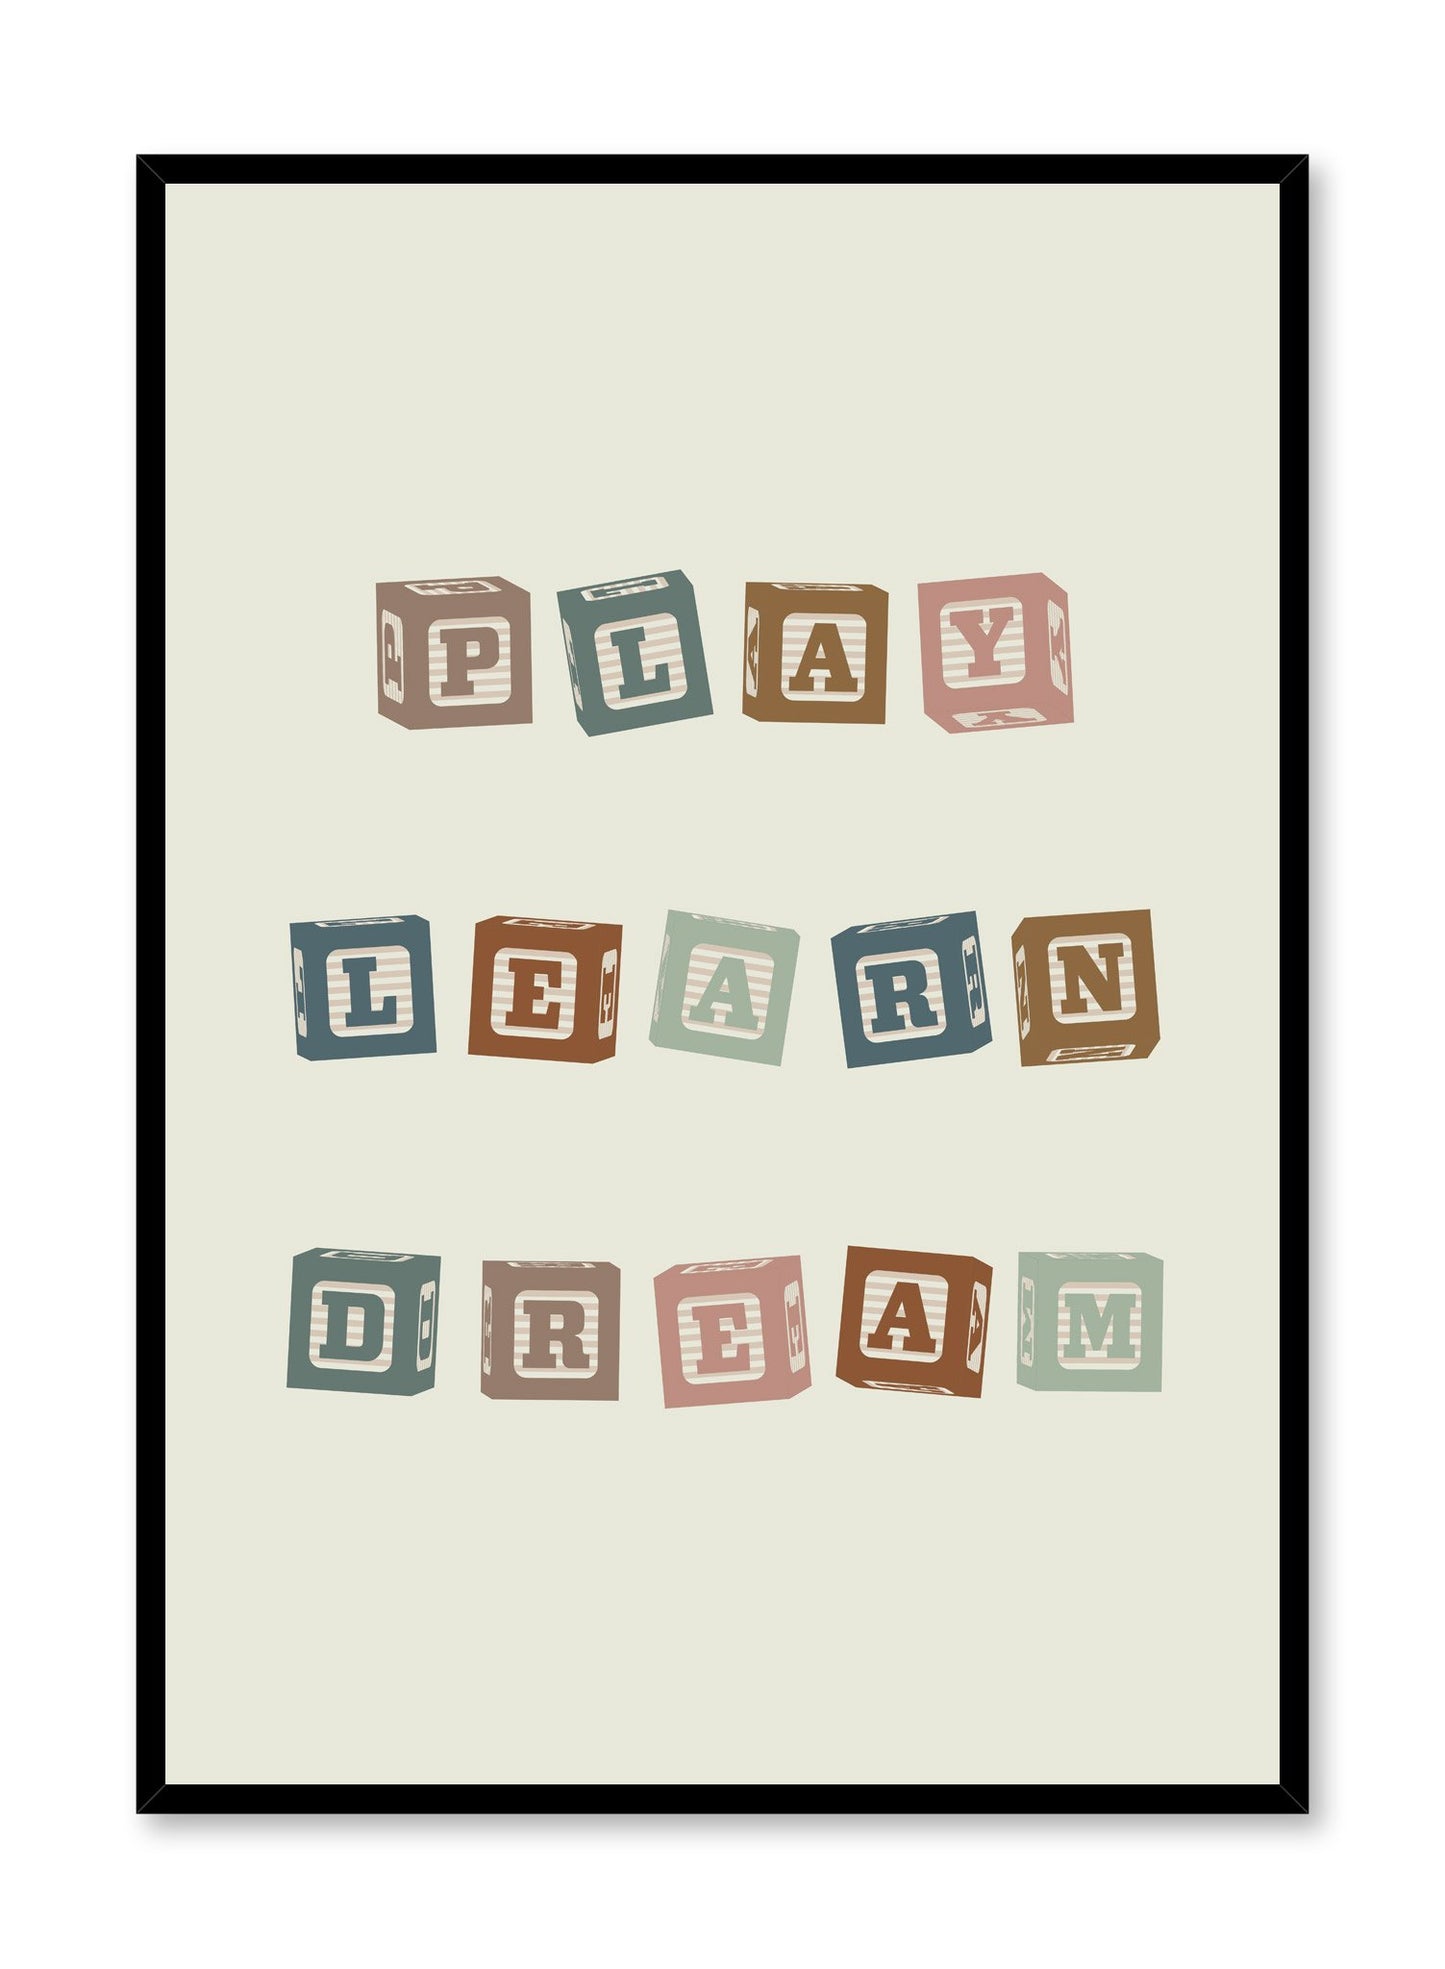 Kids nursery typography poster by Opposite Wall with Play Learn Dream